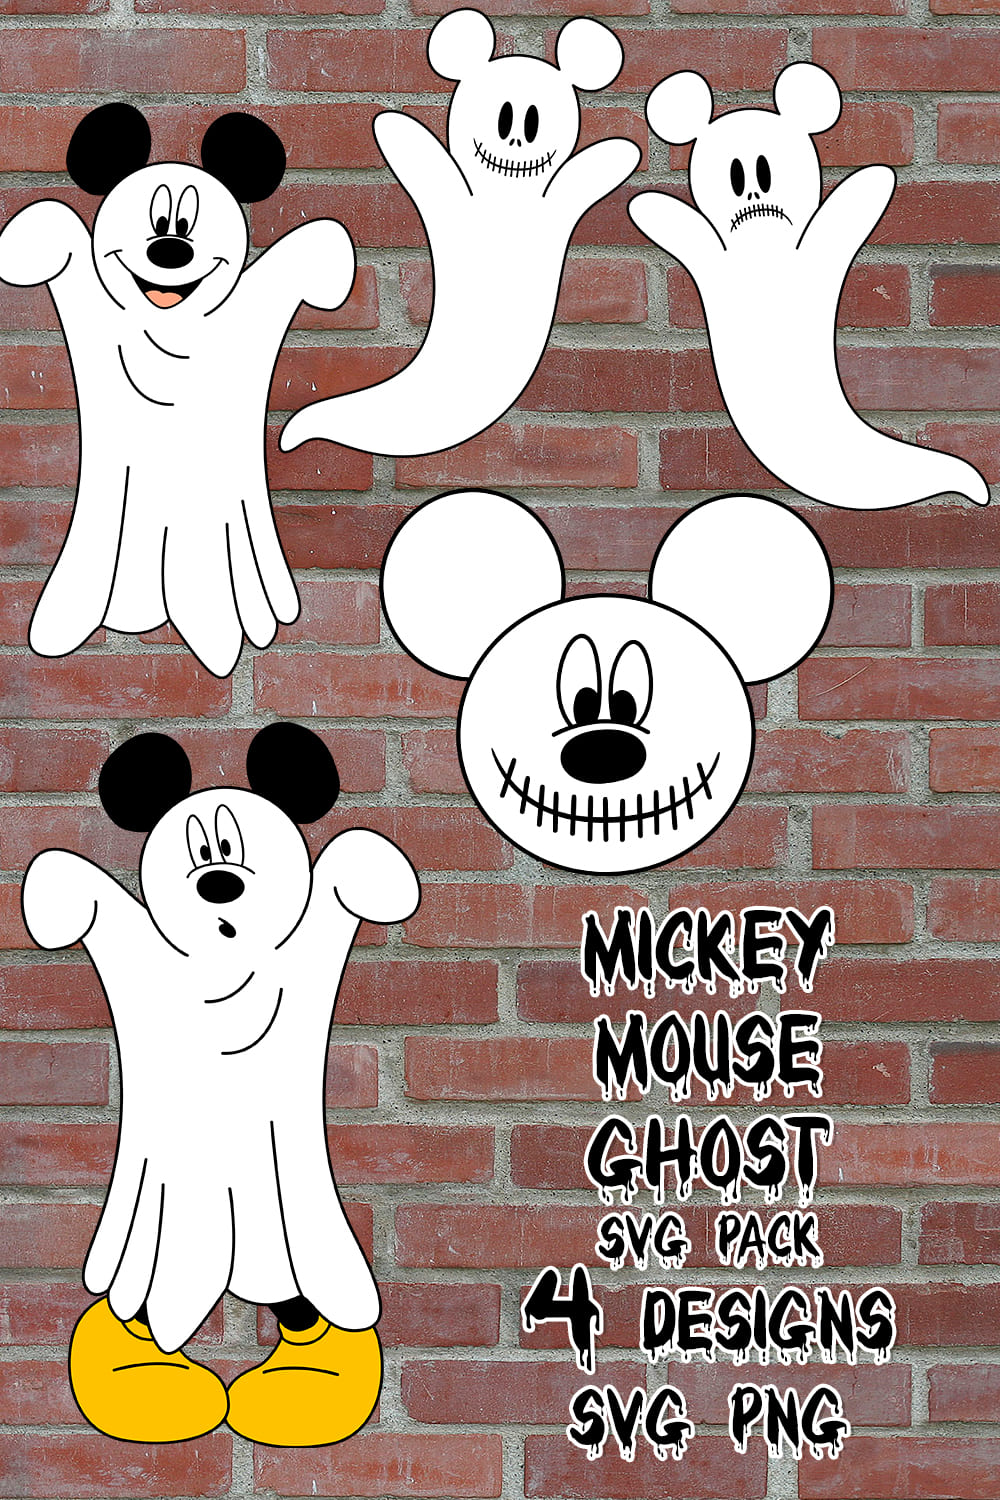 Mickey Mouse Ghost SVG - pinterest image preview.